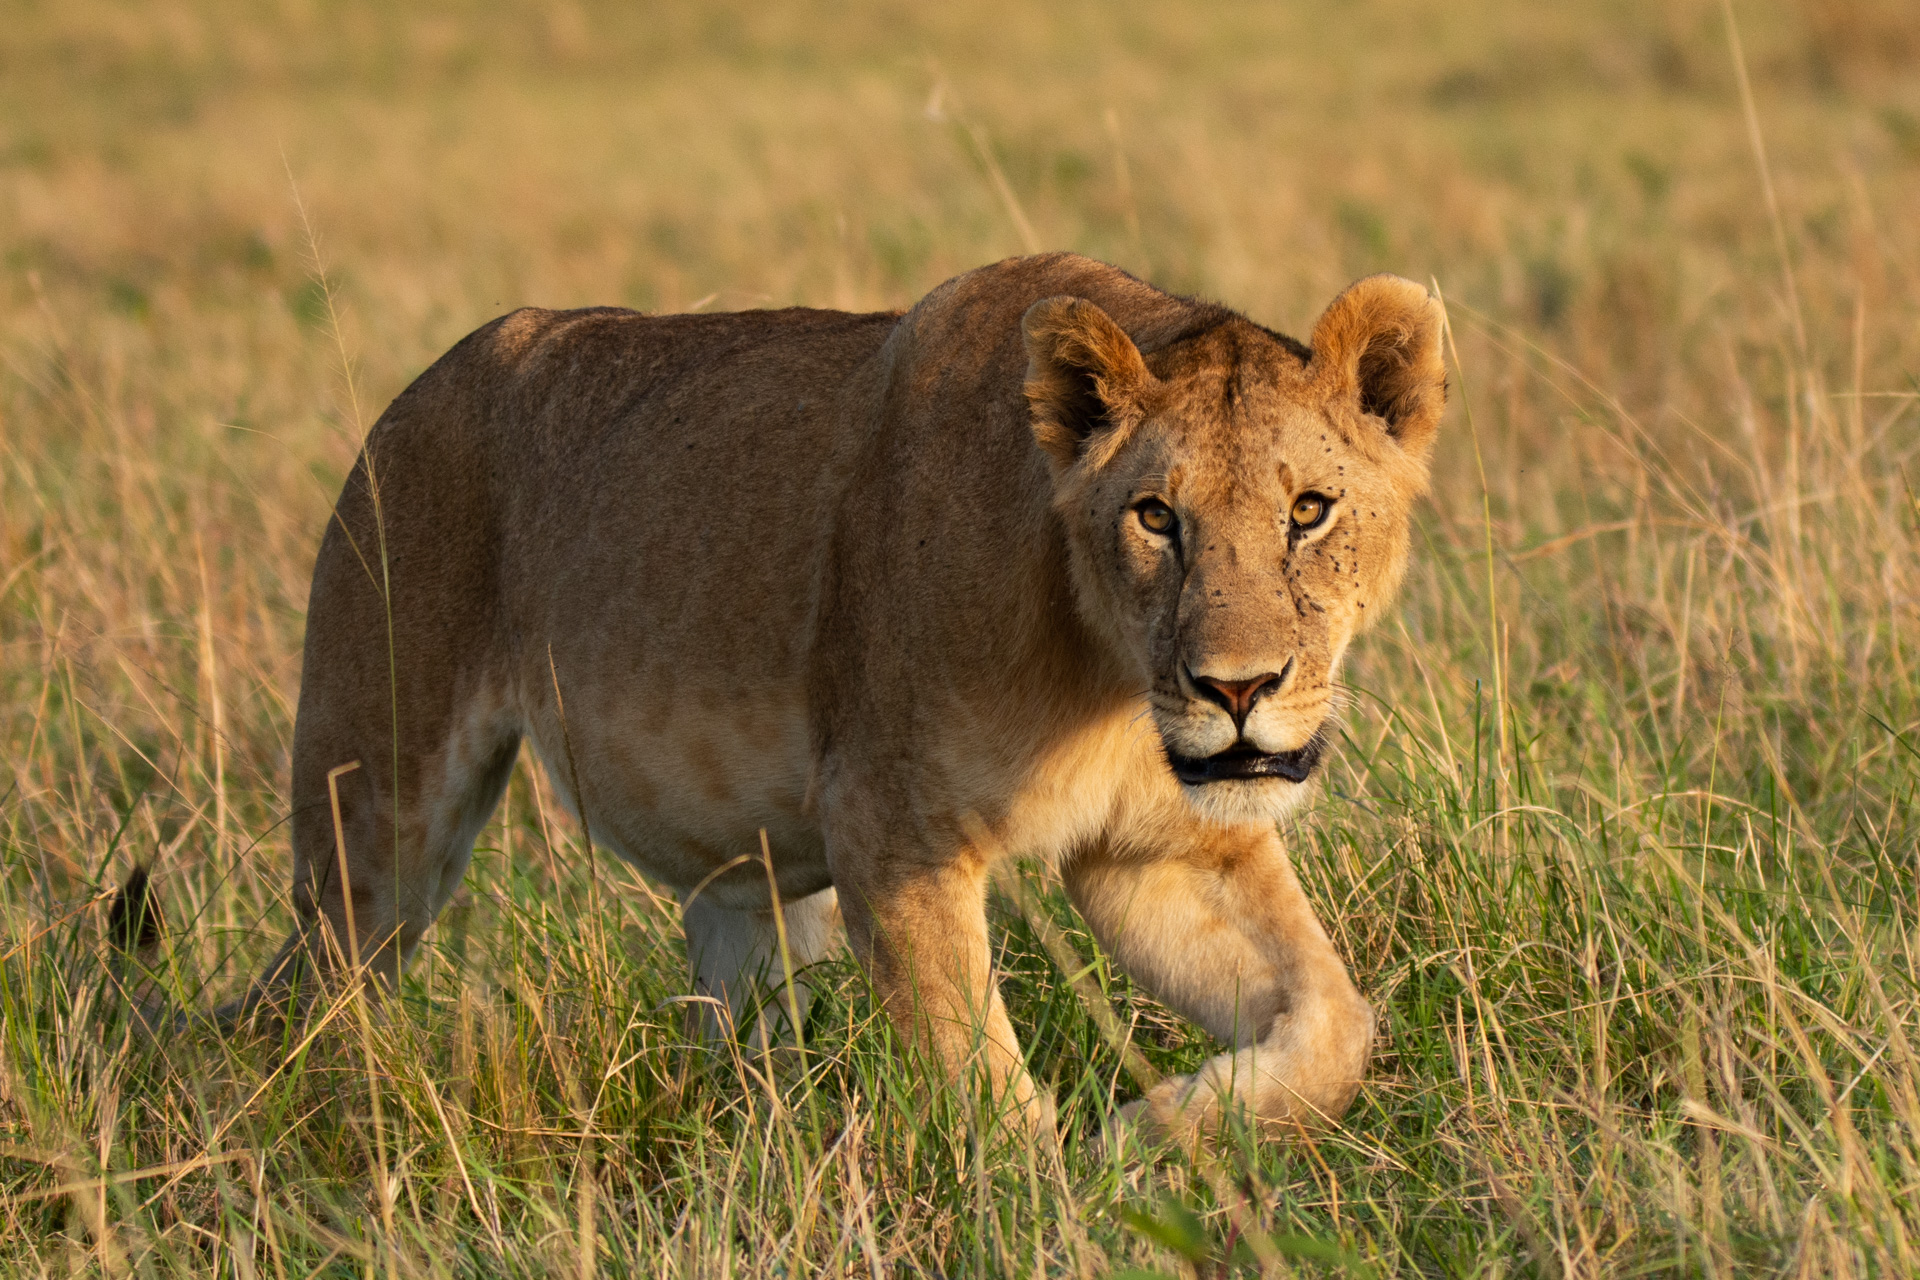 lioness walking in the grass